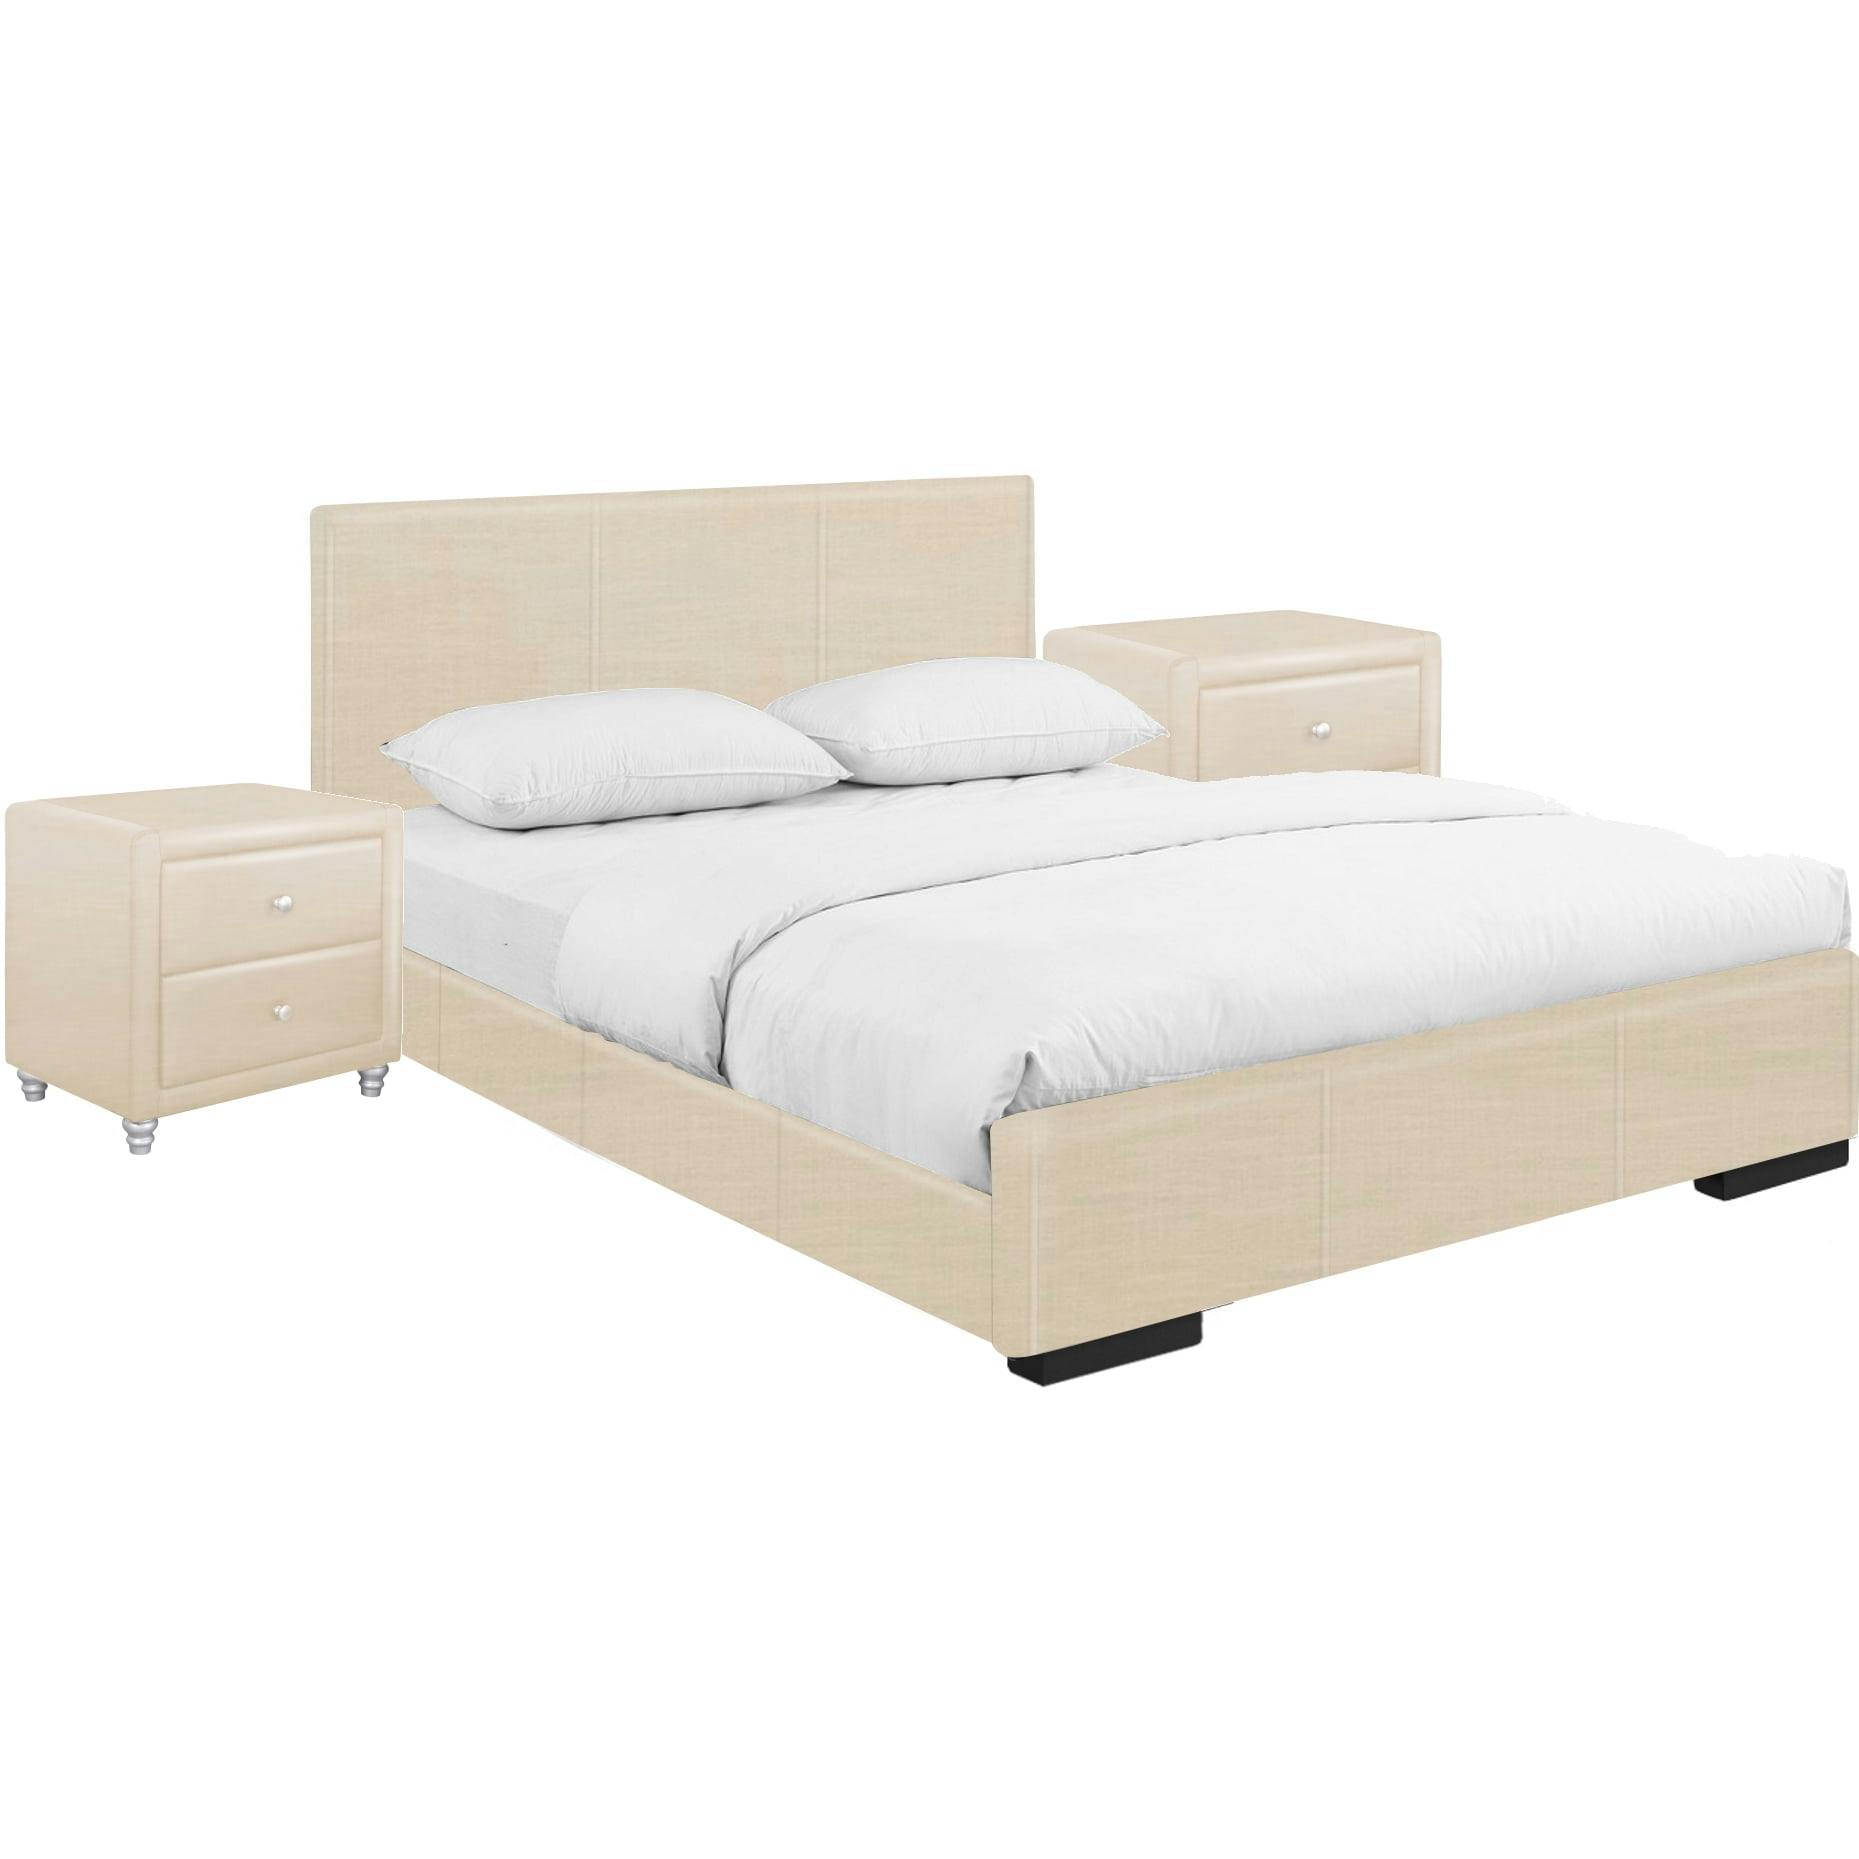 Elegant Hindes King-Sized Beige Faux Leather Upholstered Bed with Slats